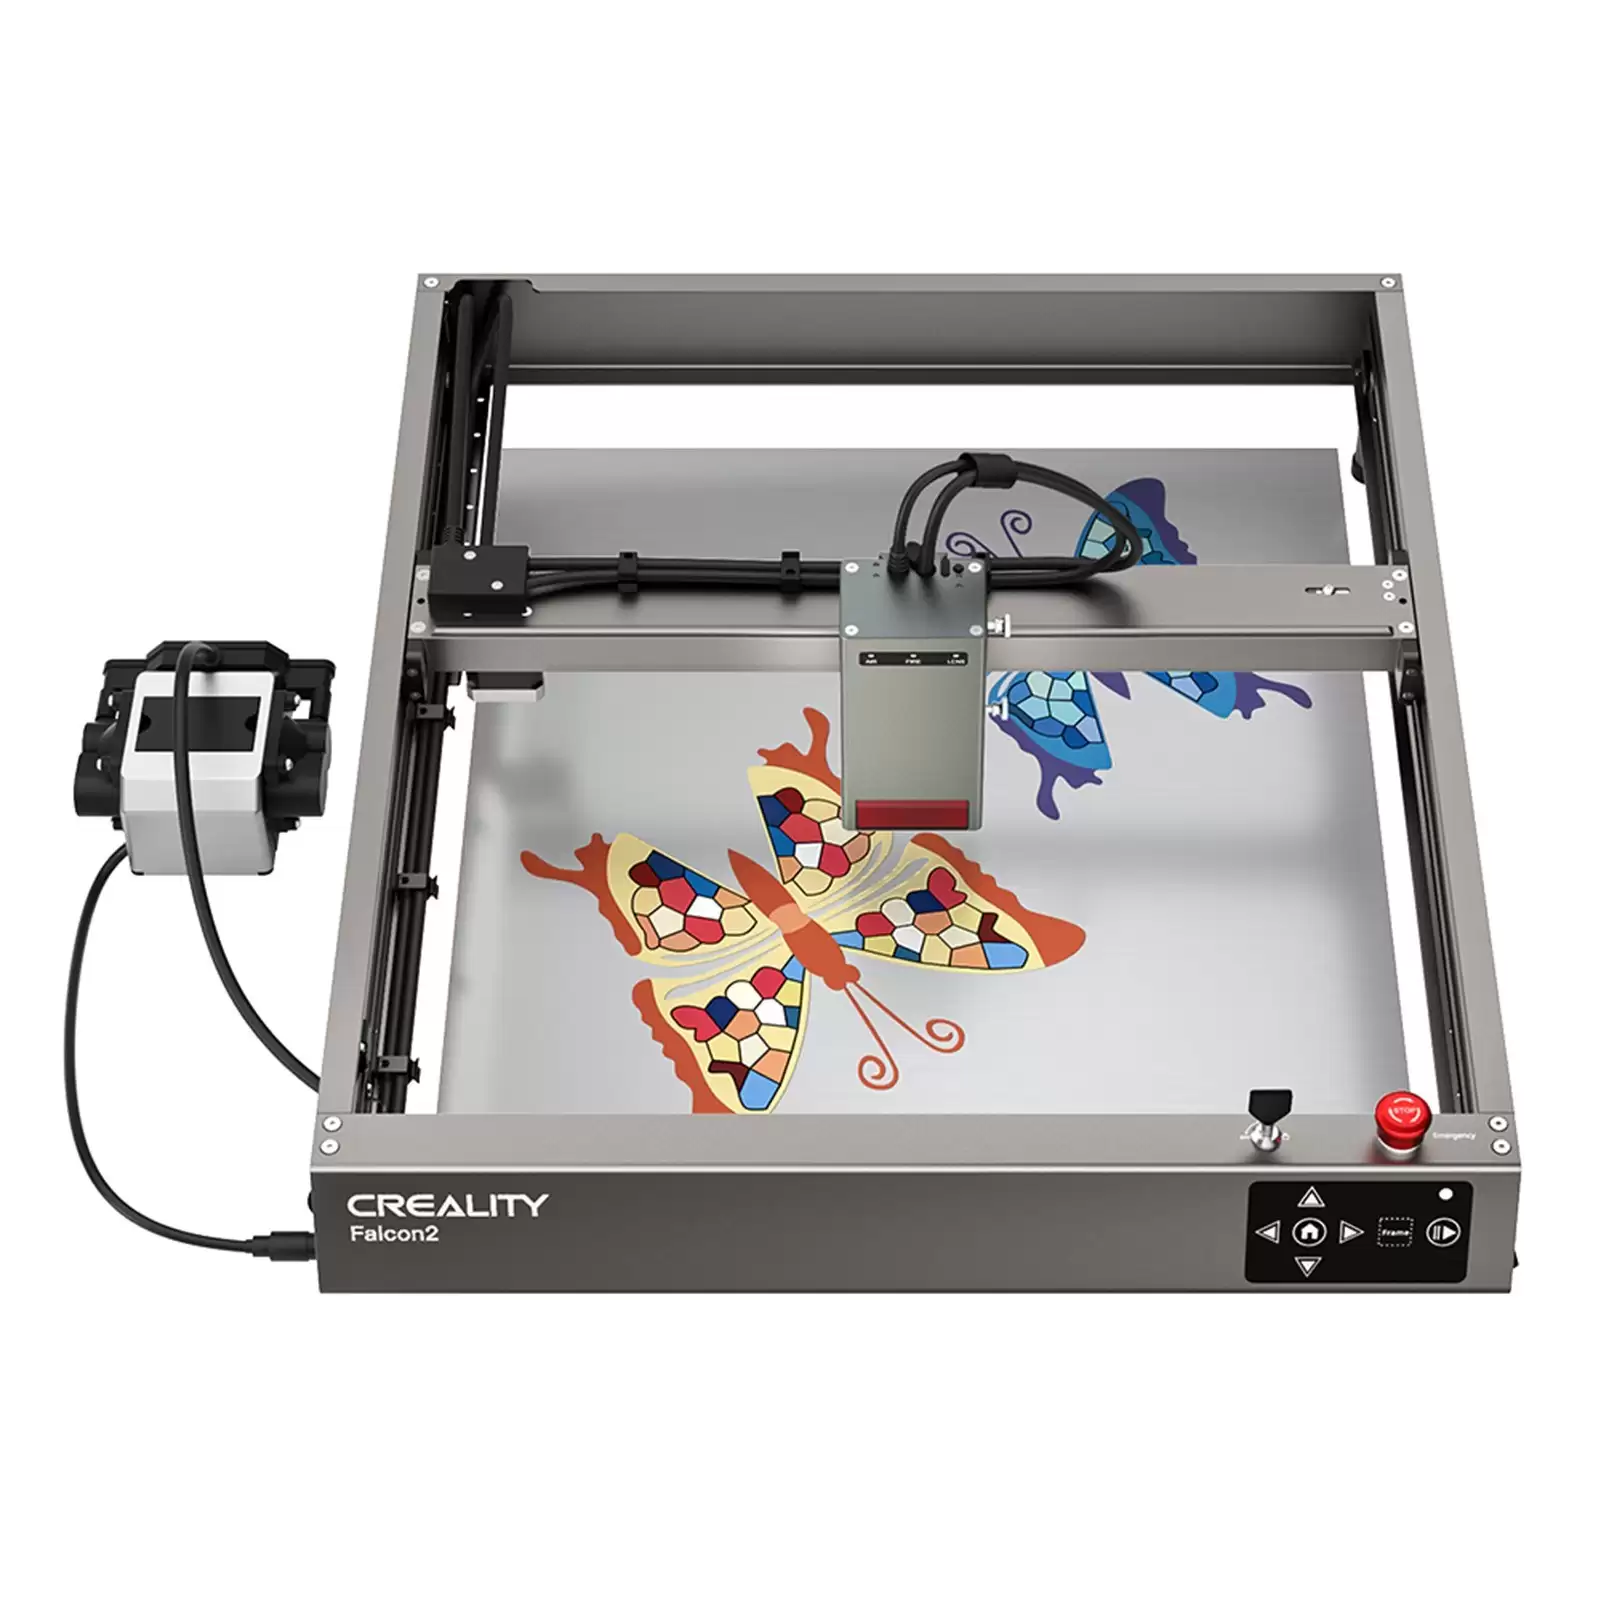 Order In Just $875 Creality Falcon2 40w Laser Engraver With Integrated Air Assist System With This Discount Coupon At Cafago